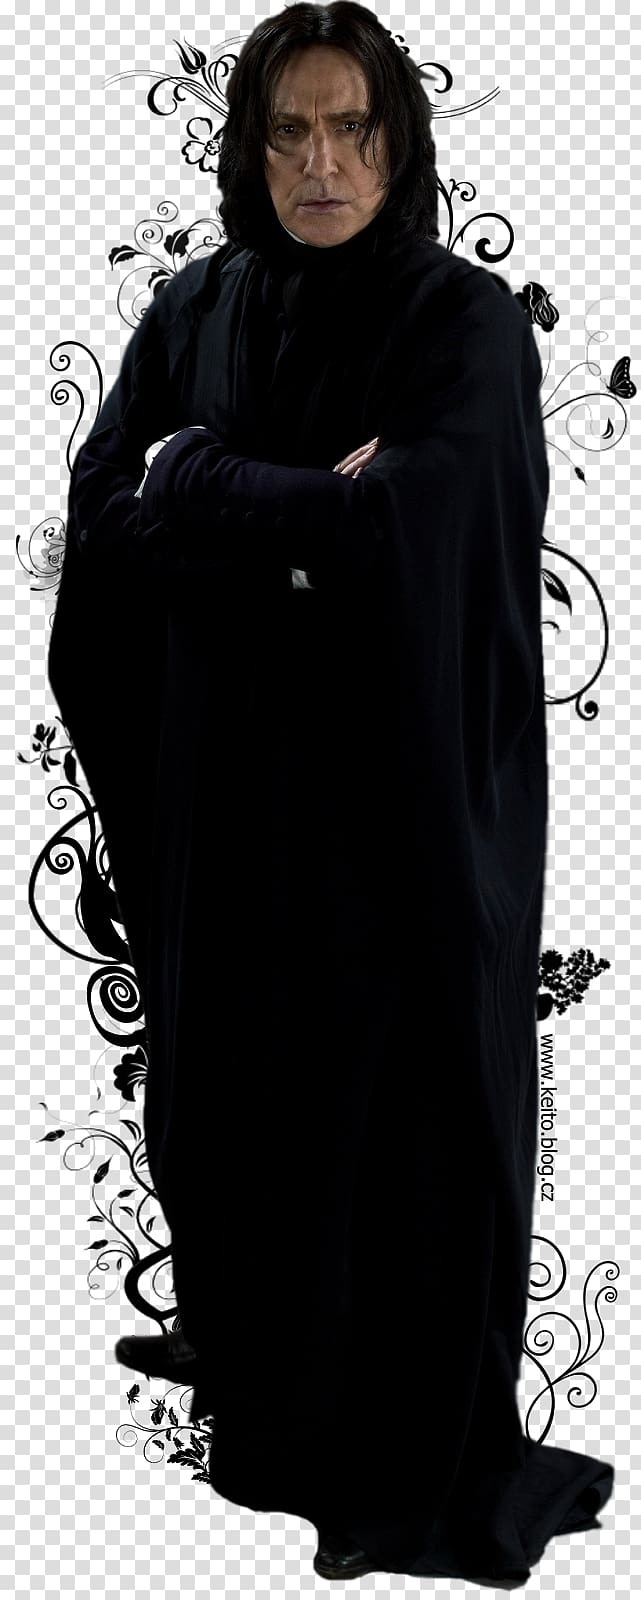 Professor Severus Snape Robe Harry Potter and the Deathly Hallows – Part 1 Cloak Black M, girl transparent background PNG clipart